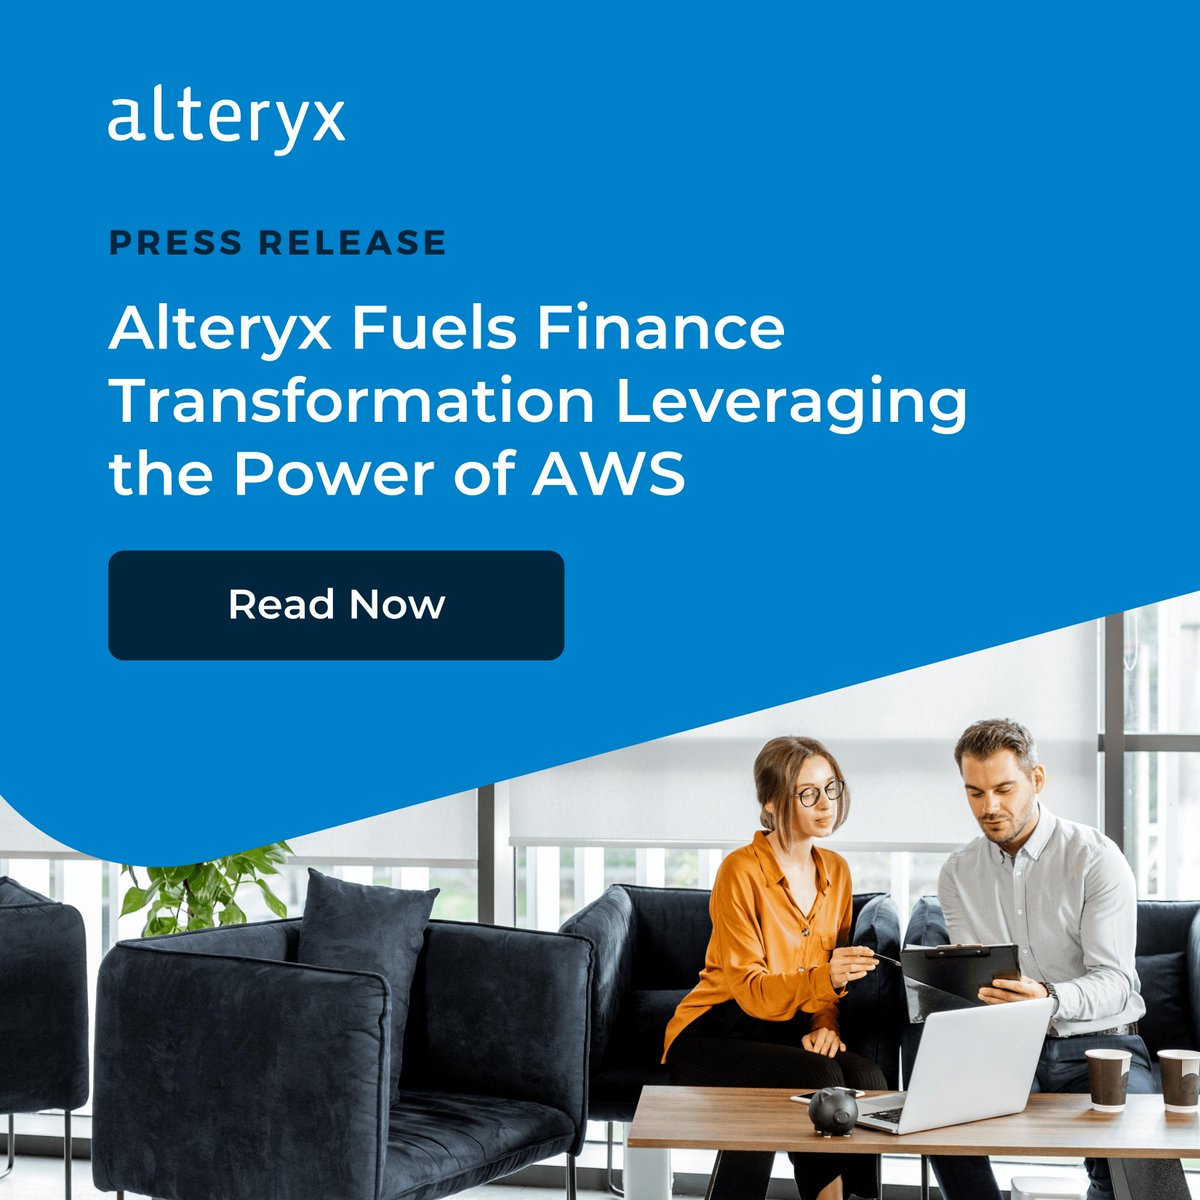 Looking to modernize your #OfficeofFinance? Look no further! Today, we announced new capabilities on AWS Cloud designed to empower CFOs to embrace cloud and data analytics as strategic tools for modernization. Read the press release to learn more: ow.ly/gyXc104NK9I